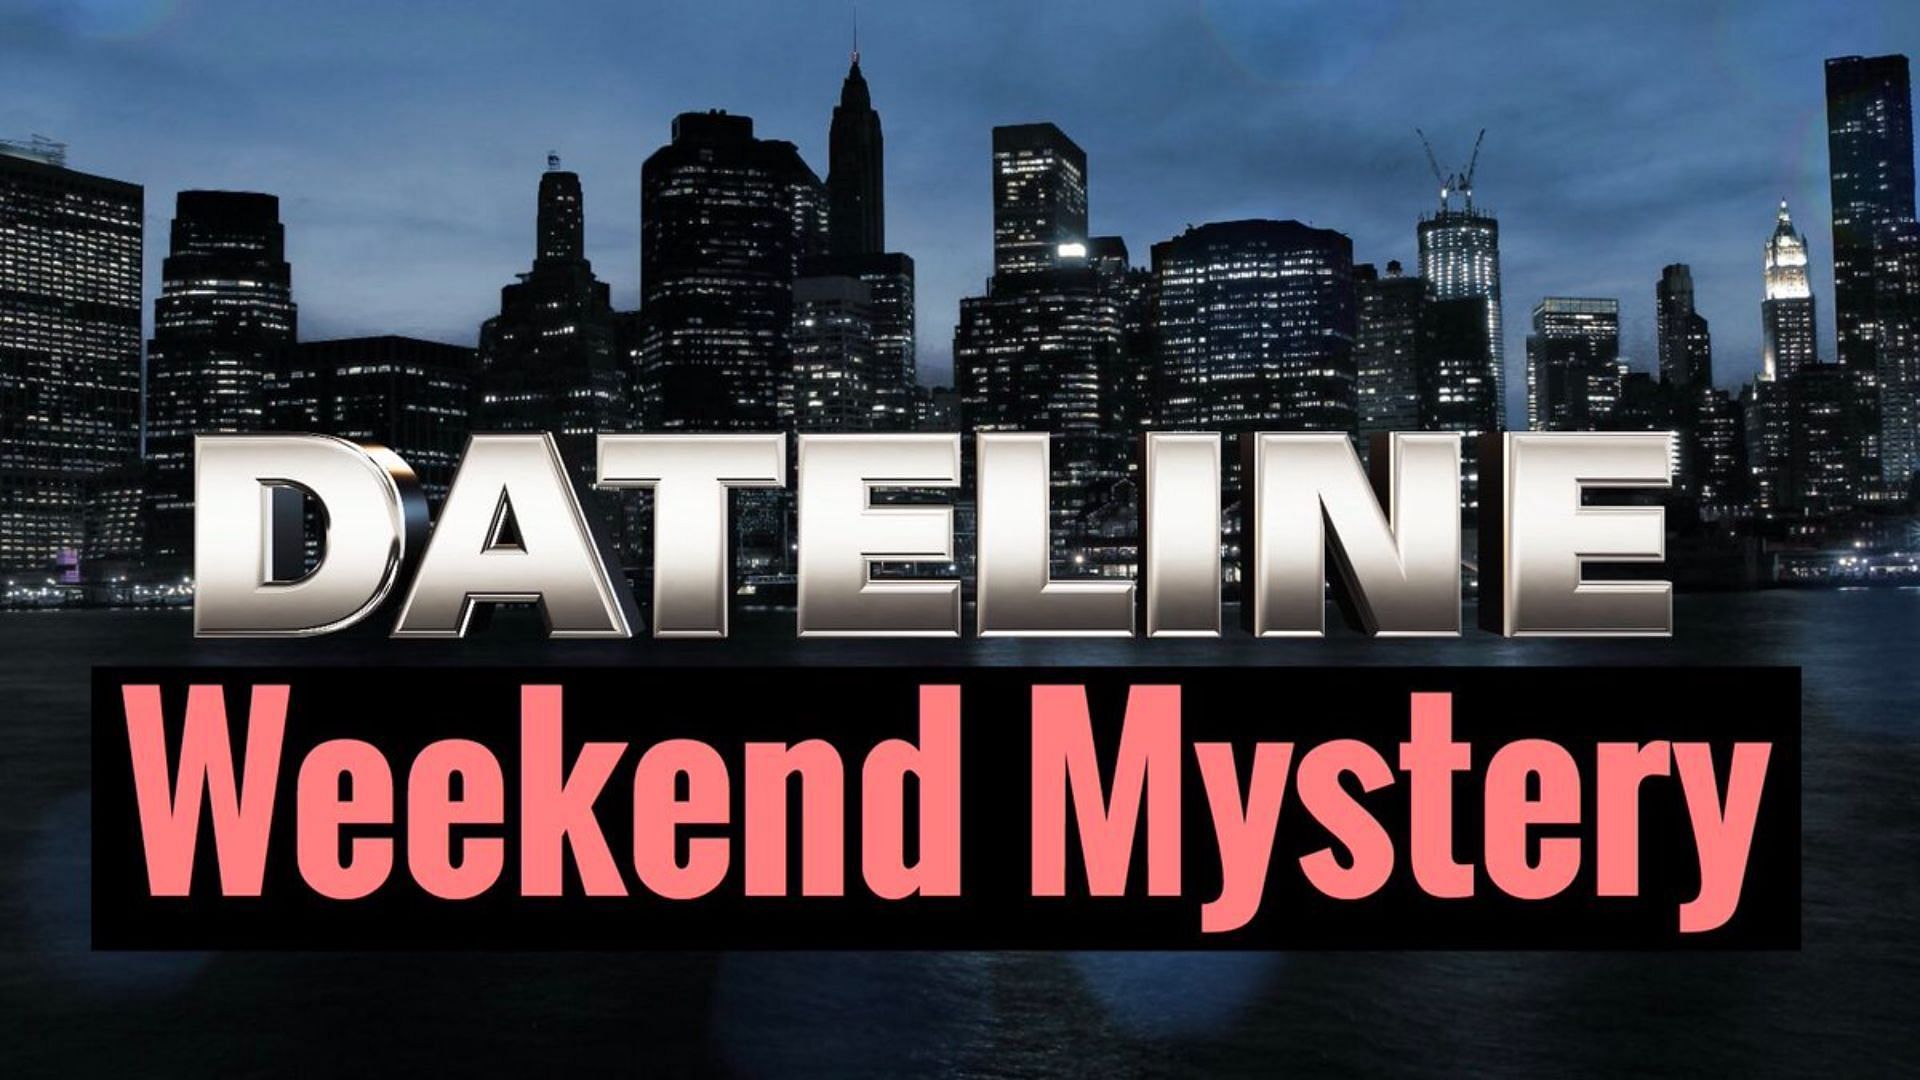 Dateline Weekend Mystery: Deadly Exchange will premiere on 7 May 2022, 7/8c on NBC (Image via nbcnews.com)